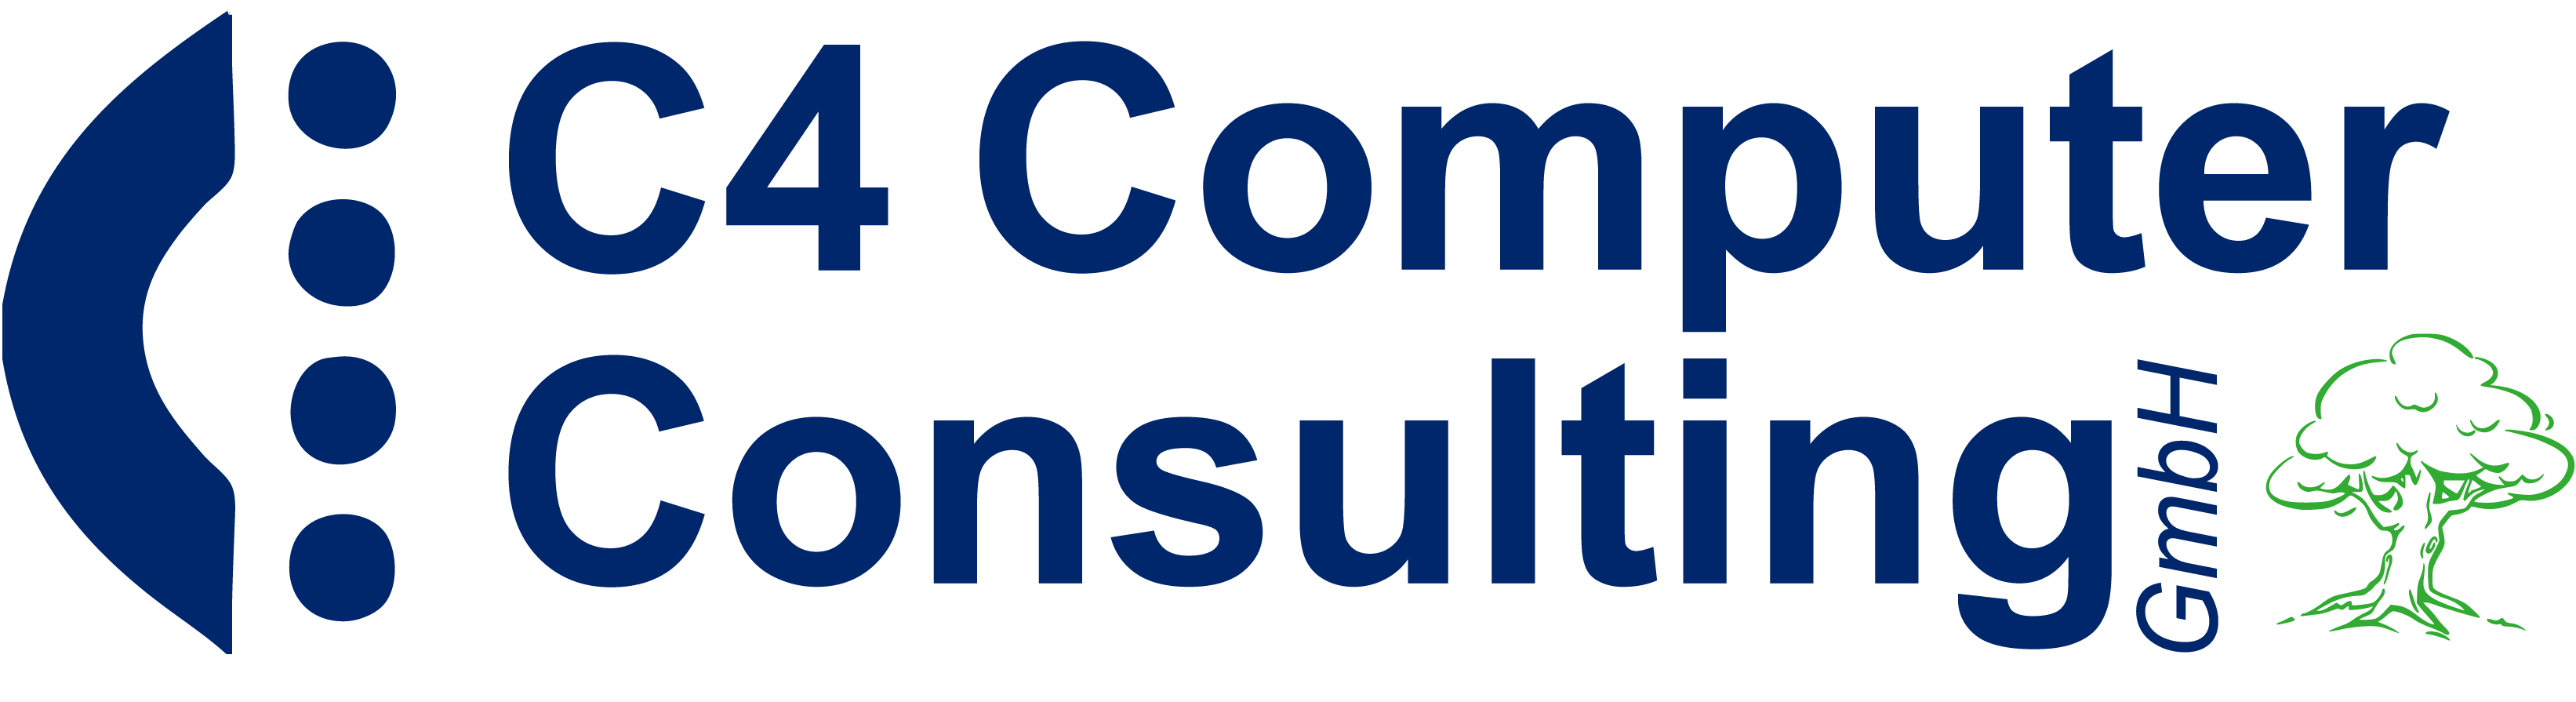 C4 Computer Consulting GmbH